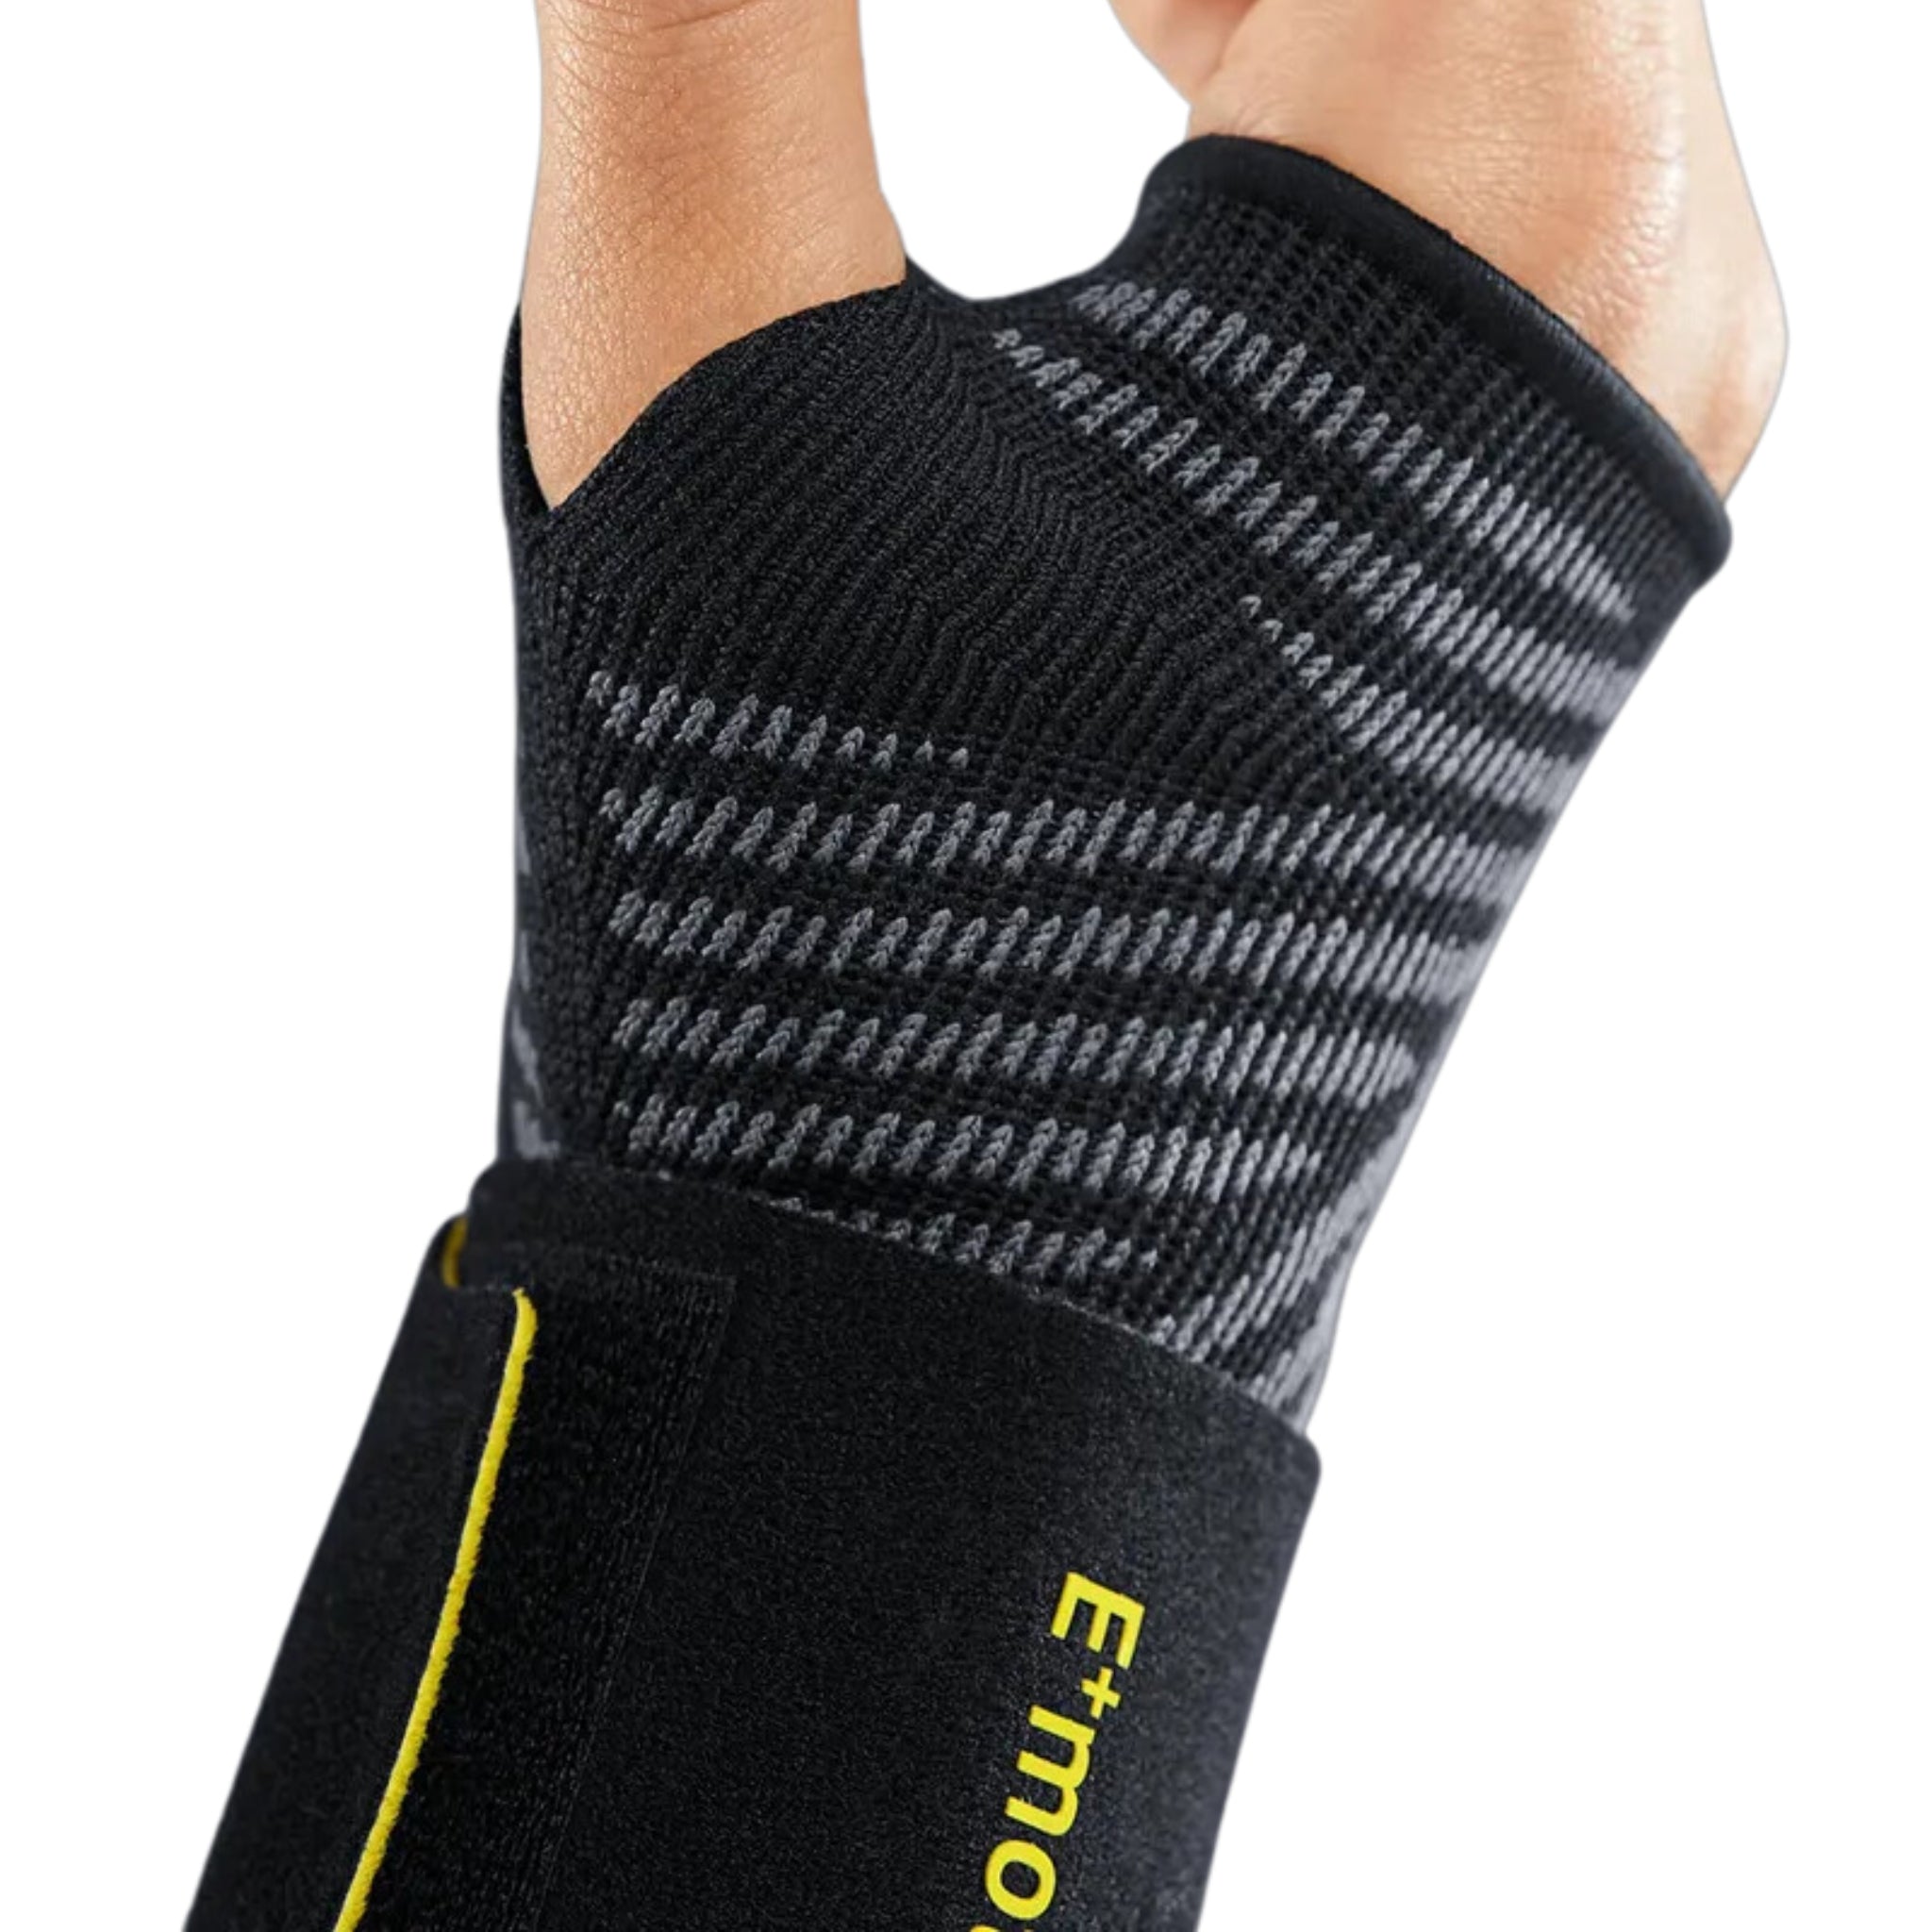 E+motion® Manumed Active Wrist Sport Support